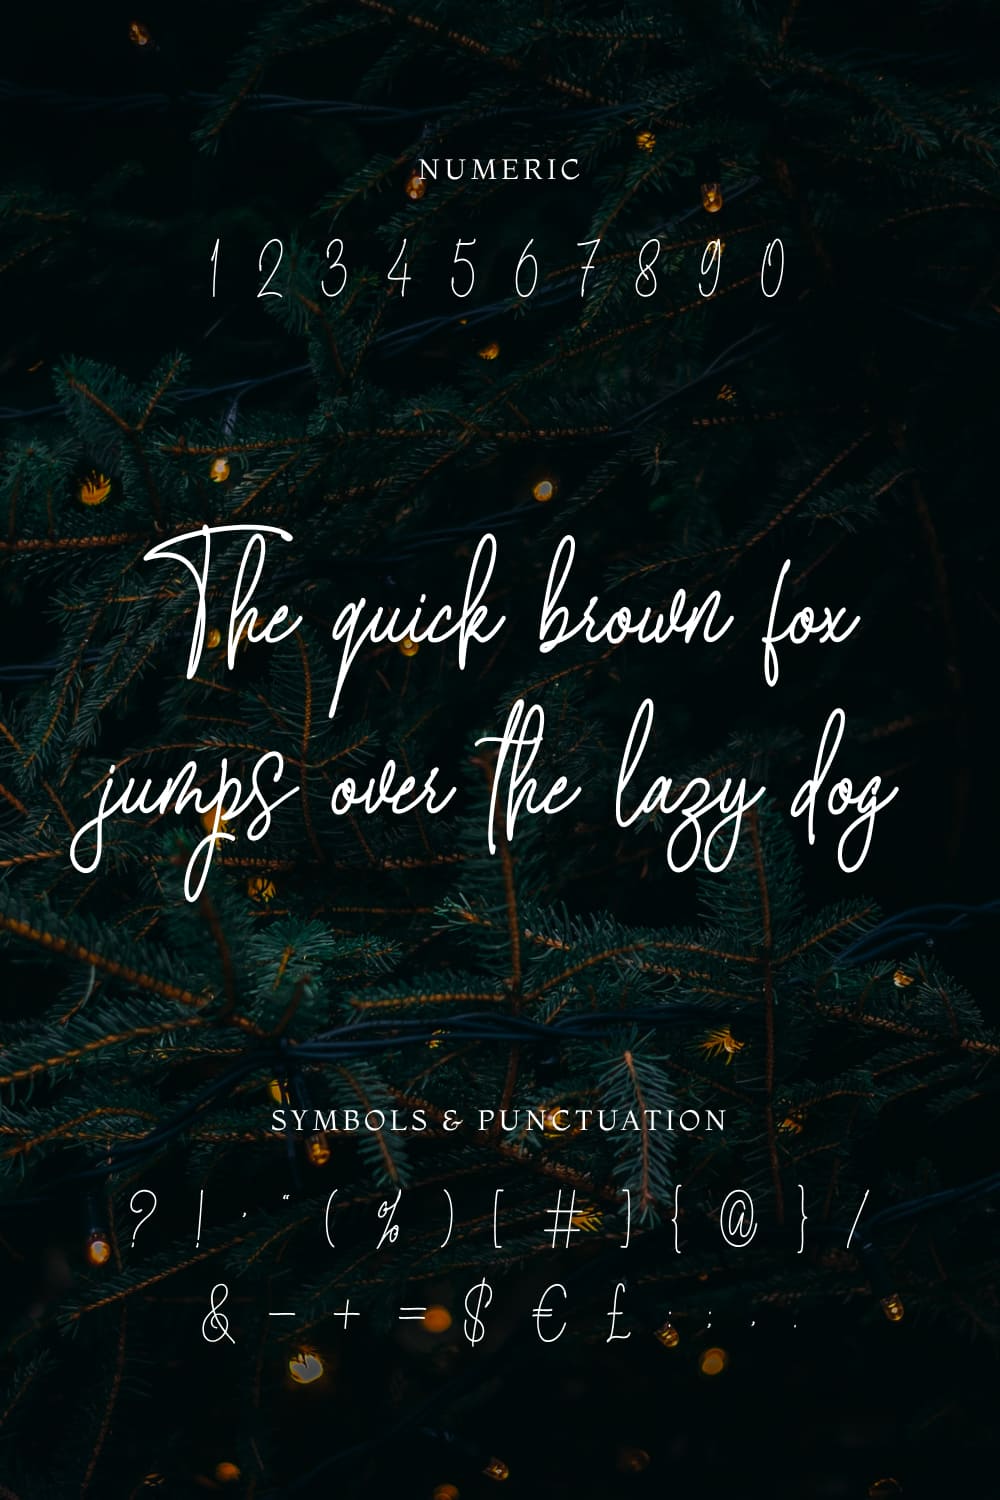 Numeric option of the font on the festive background.